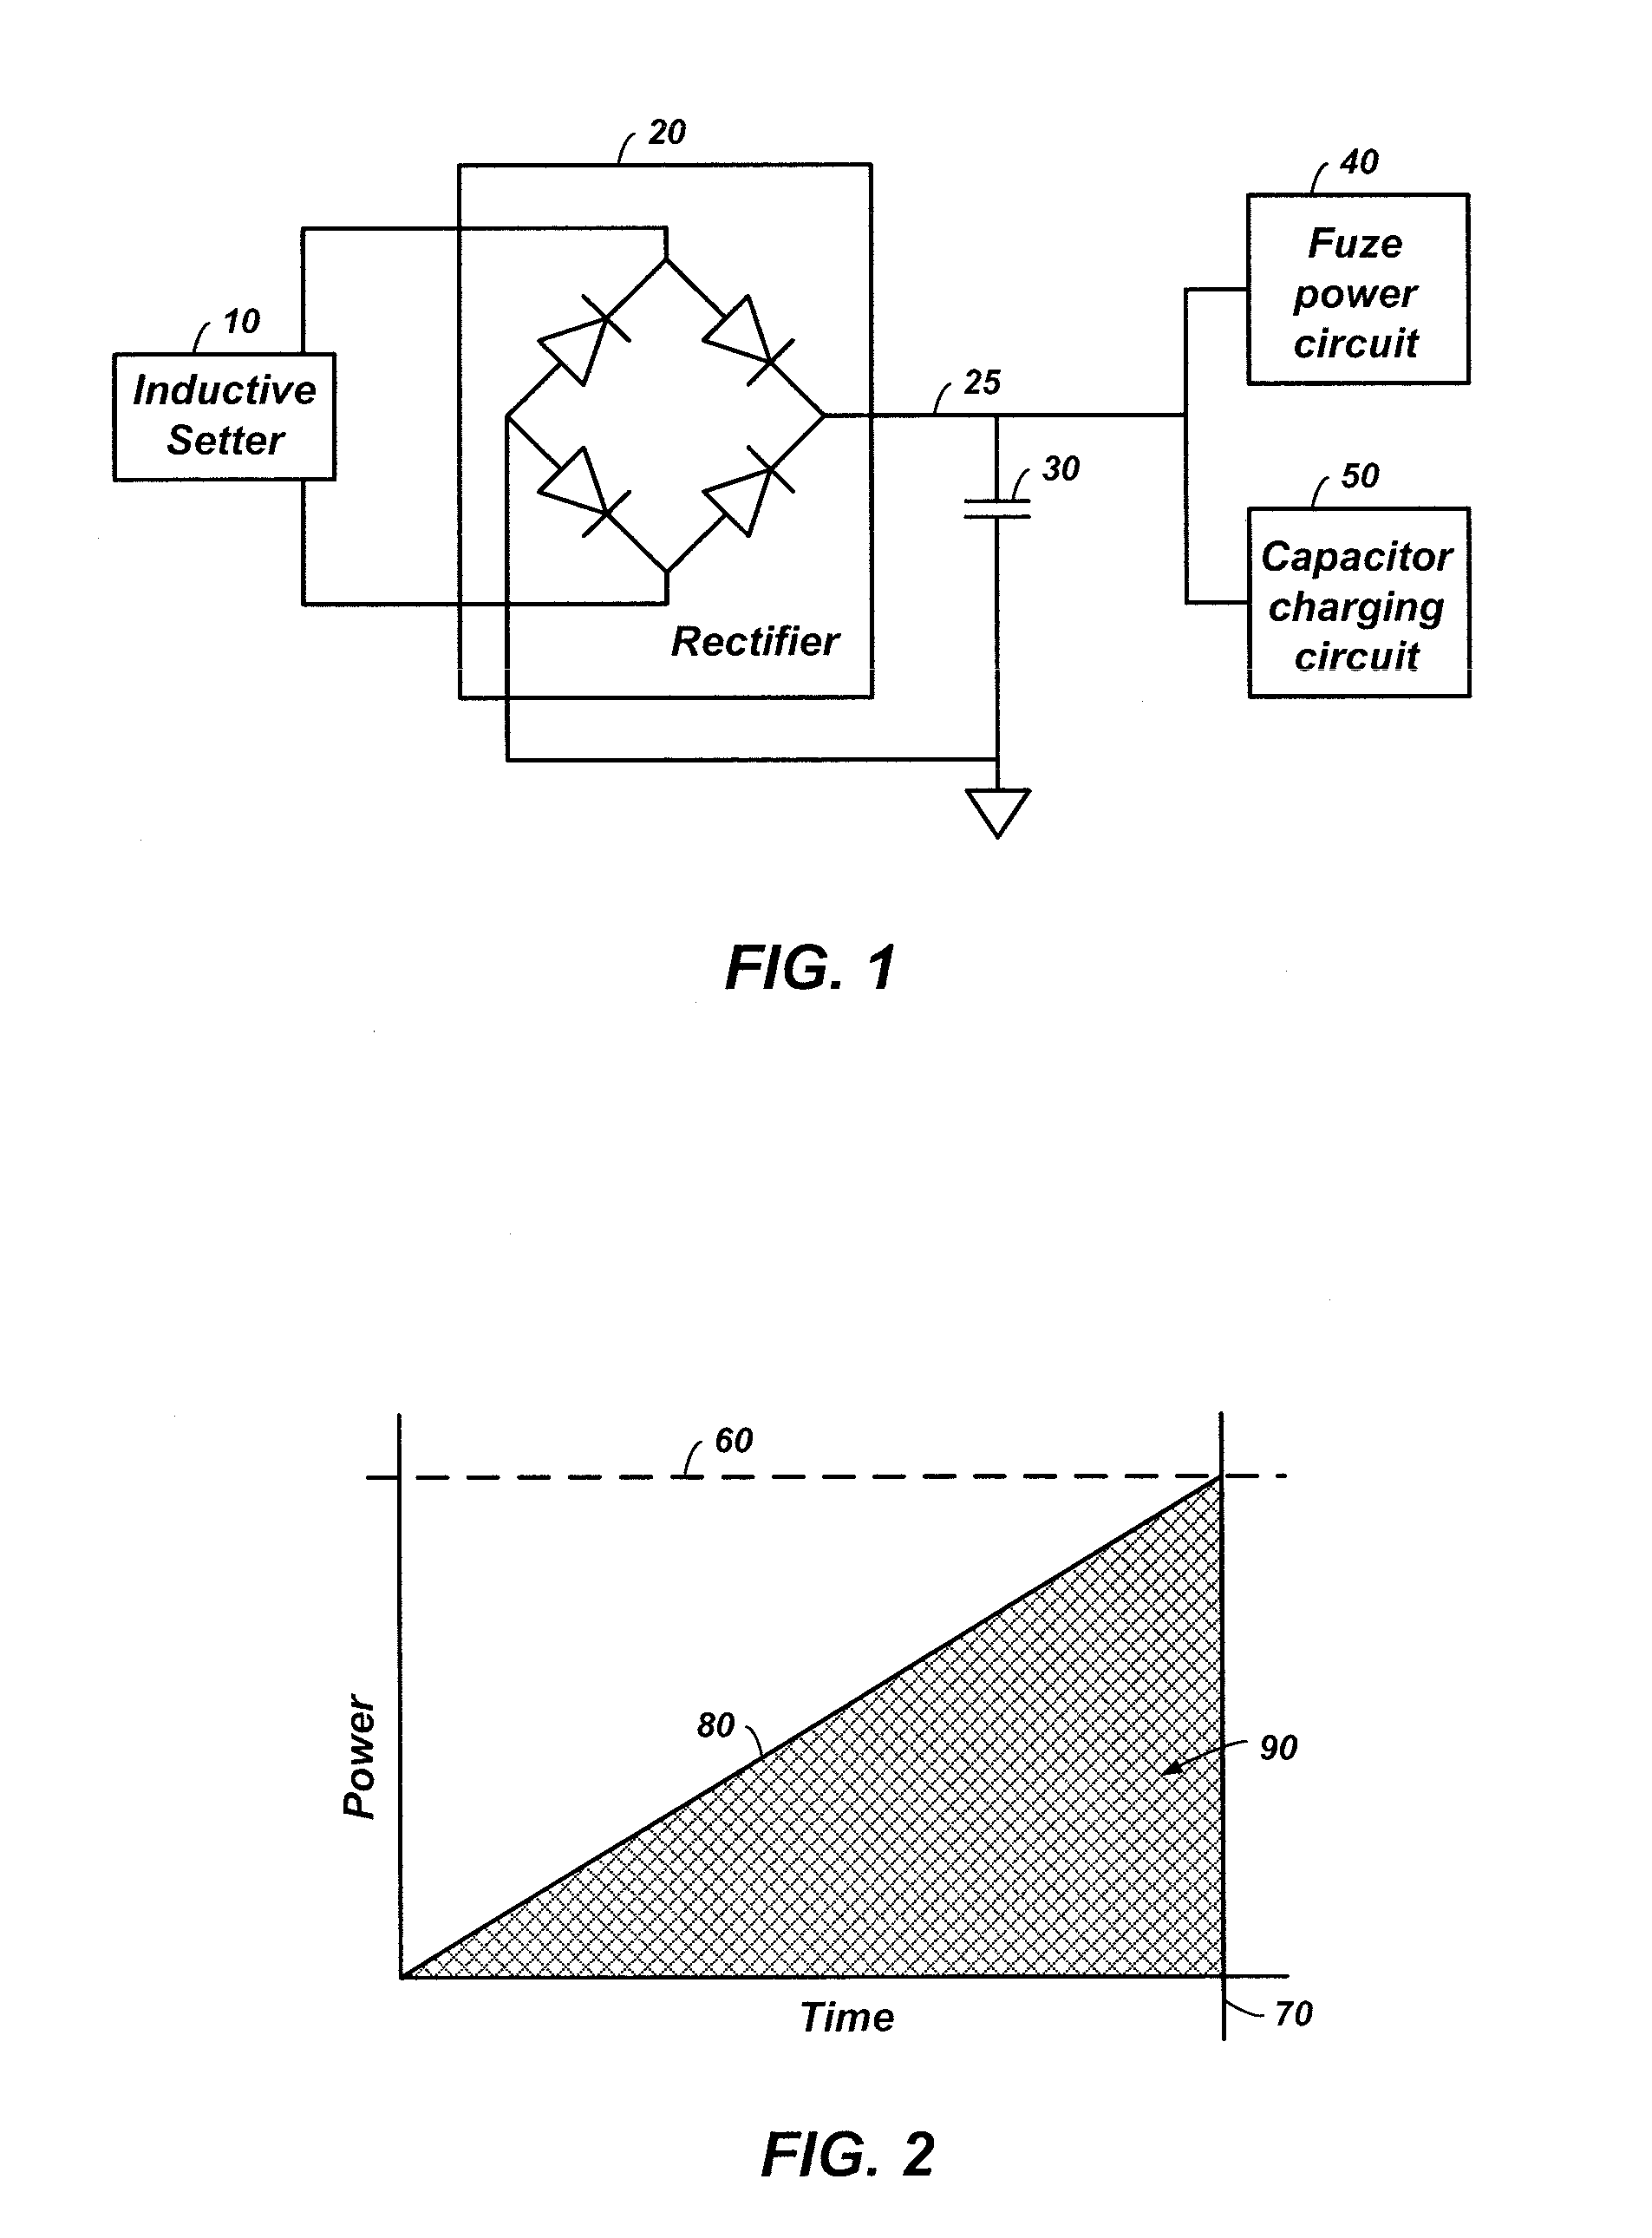 Methods and apparatuses for inductive energy capture for fuzes